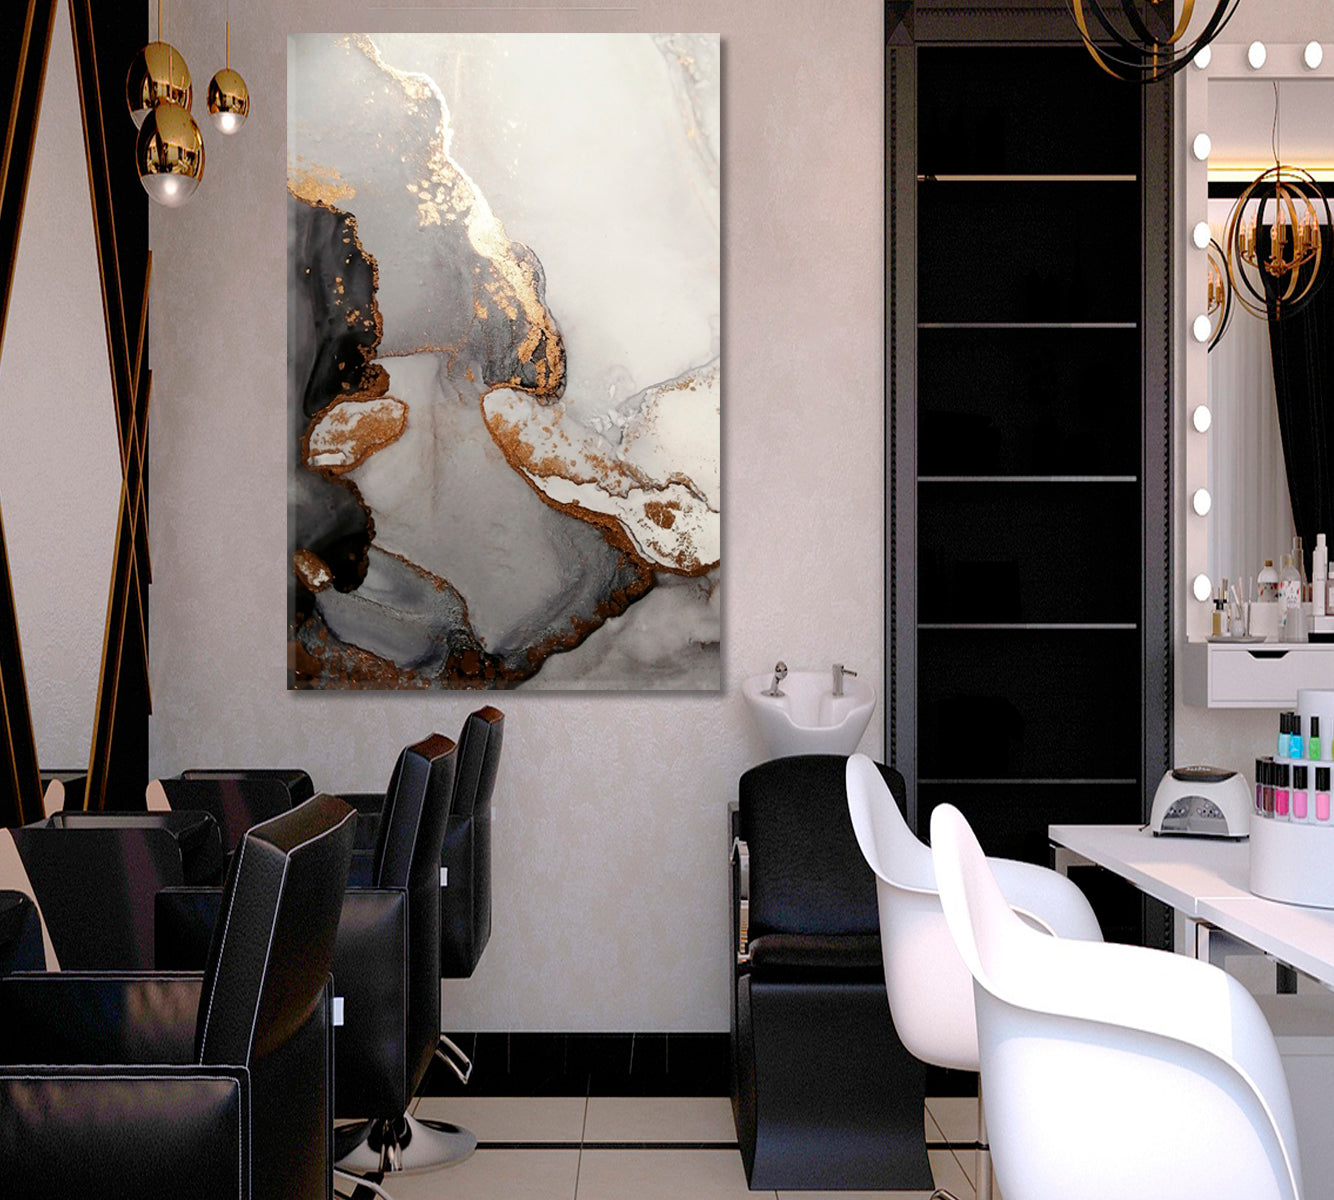 ABSTRACT MARBLE ART Fluid Oriental Turkish Style Black And Gold | Vertical Fluid Art, Oriental Marbling Canvas Print Artesty 1 Panel 16"x24" 